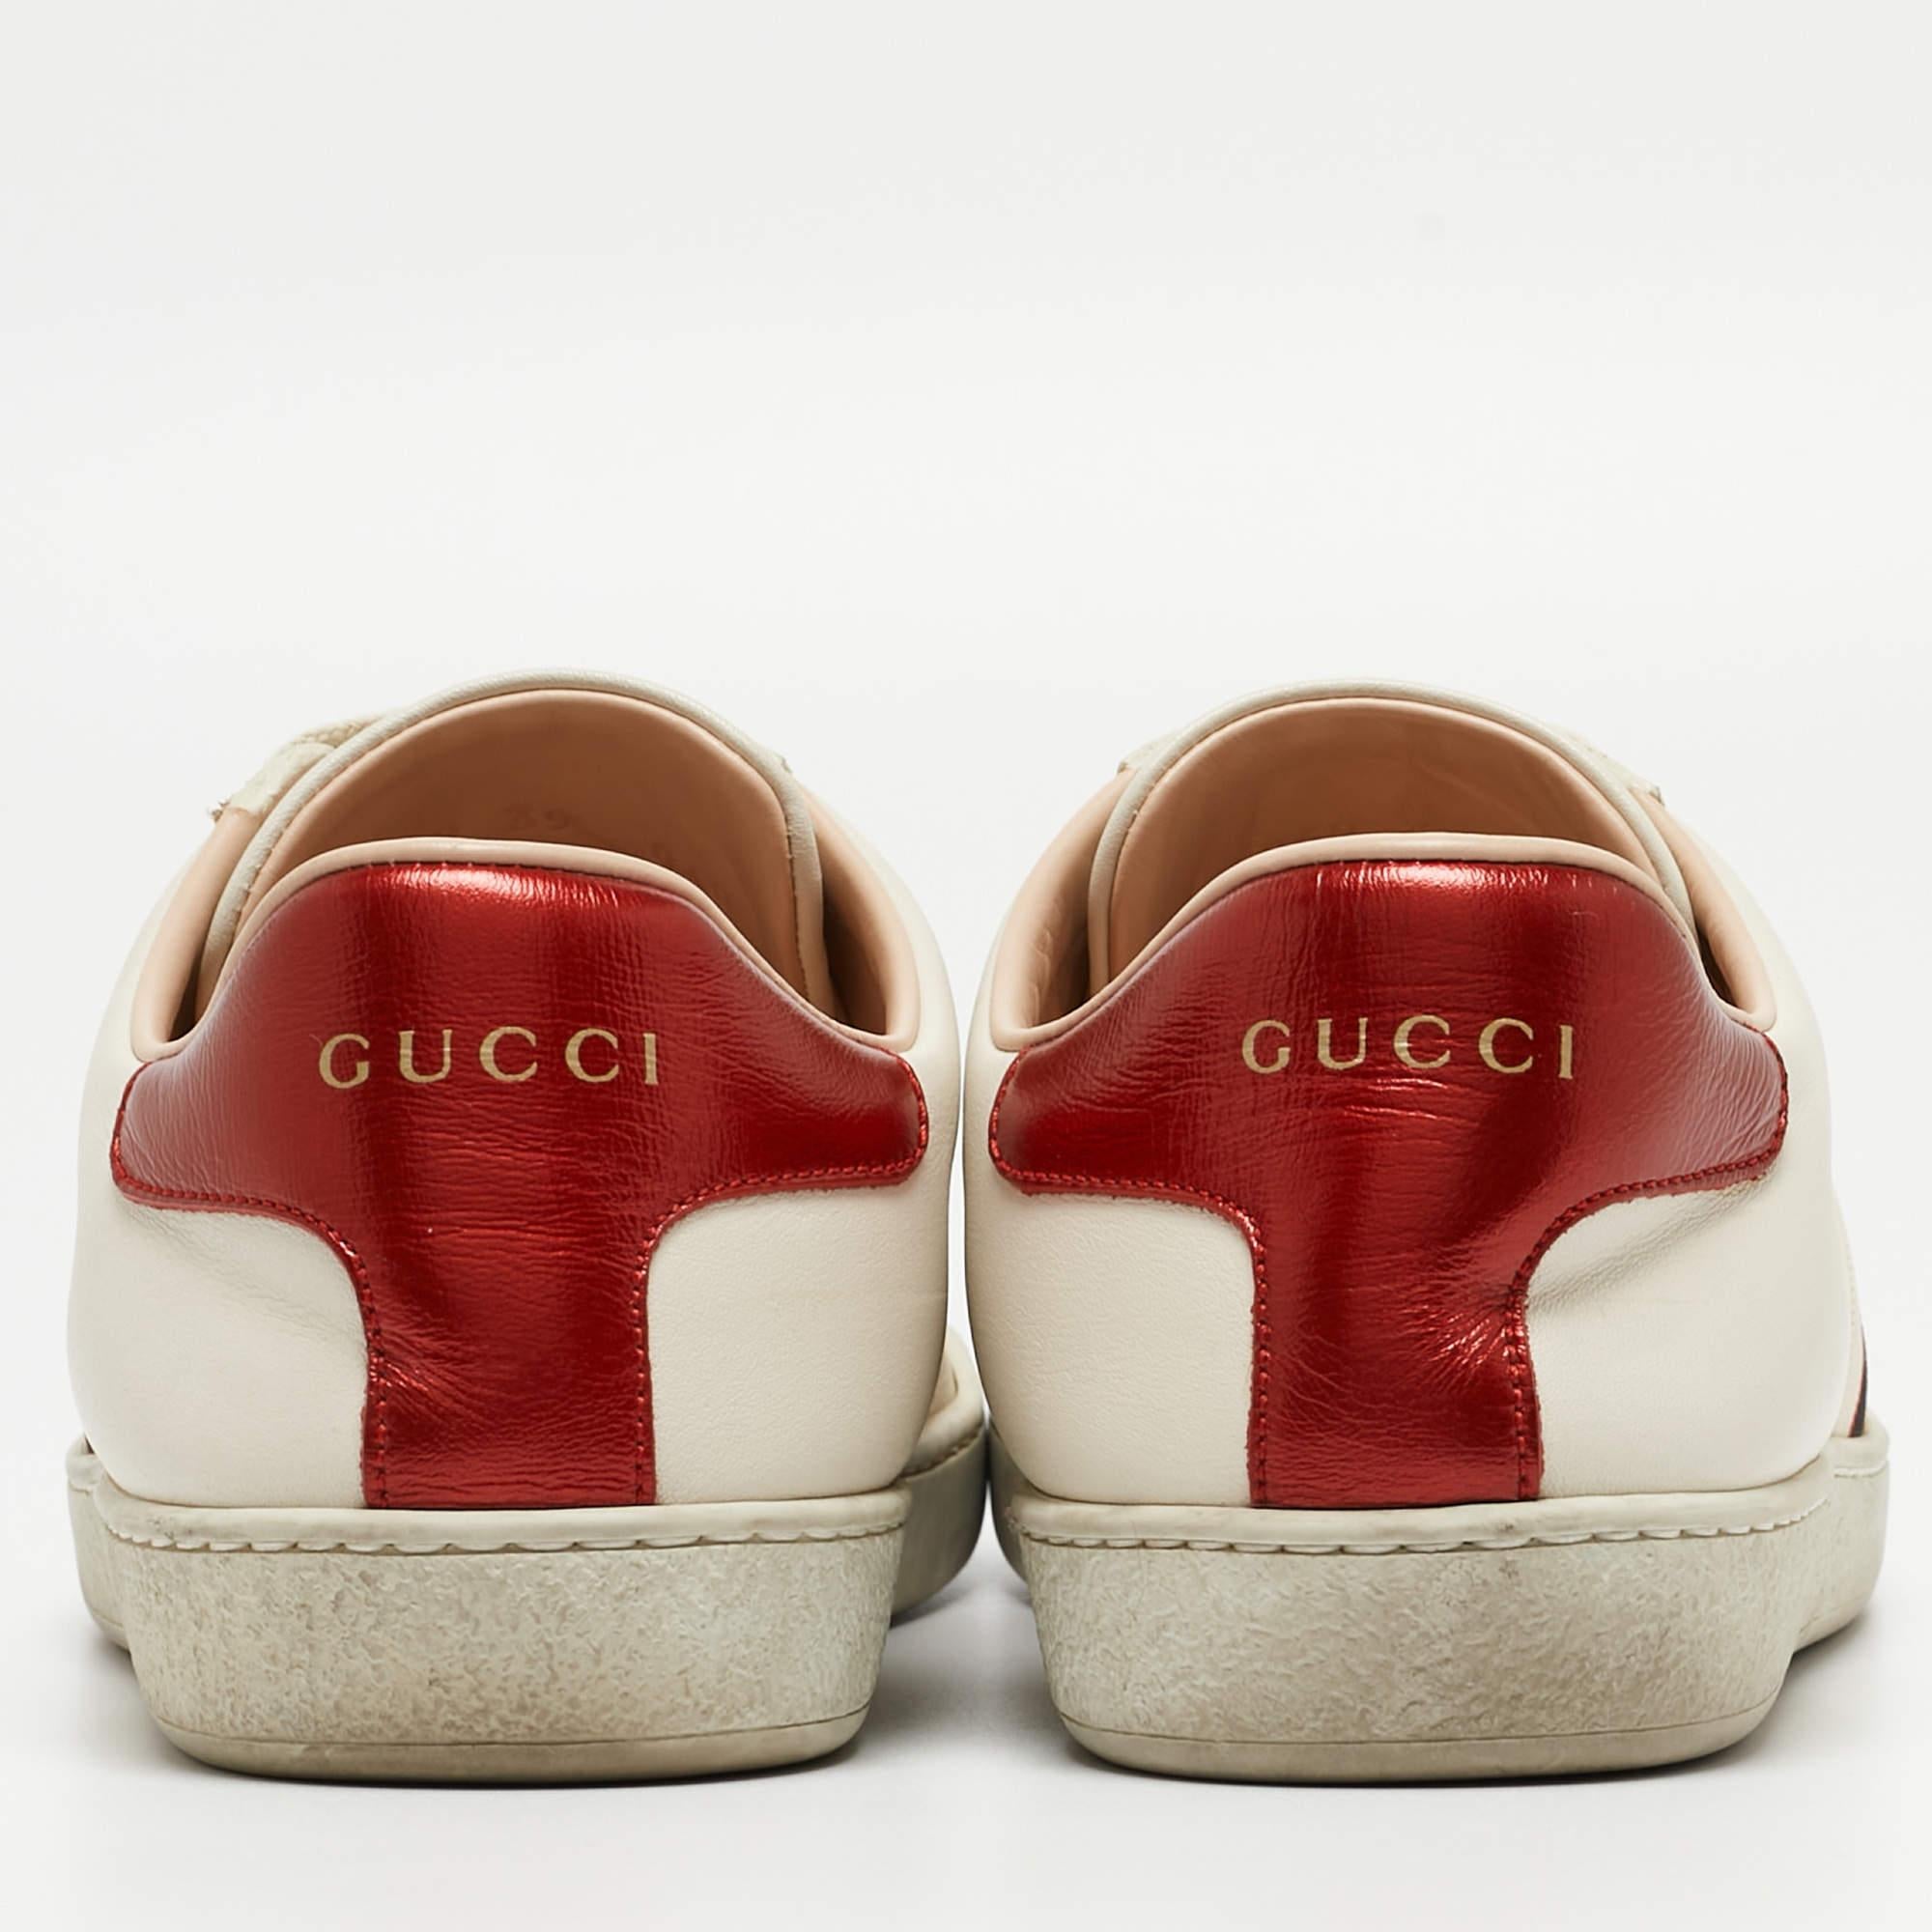 Gucci Off White/Red Leather Ace Stripe Sneakers Size 39 For Sale 2